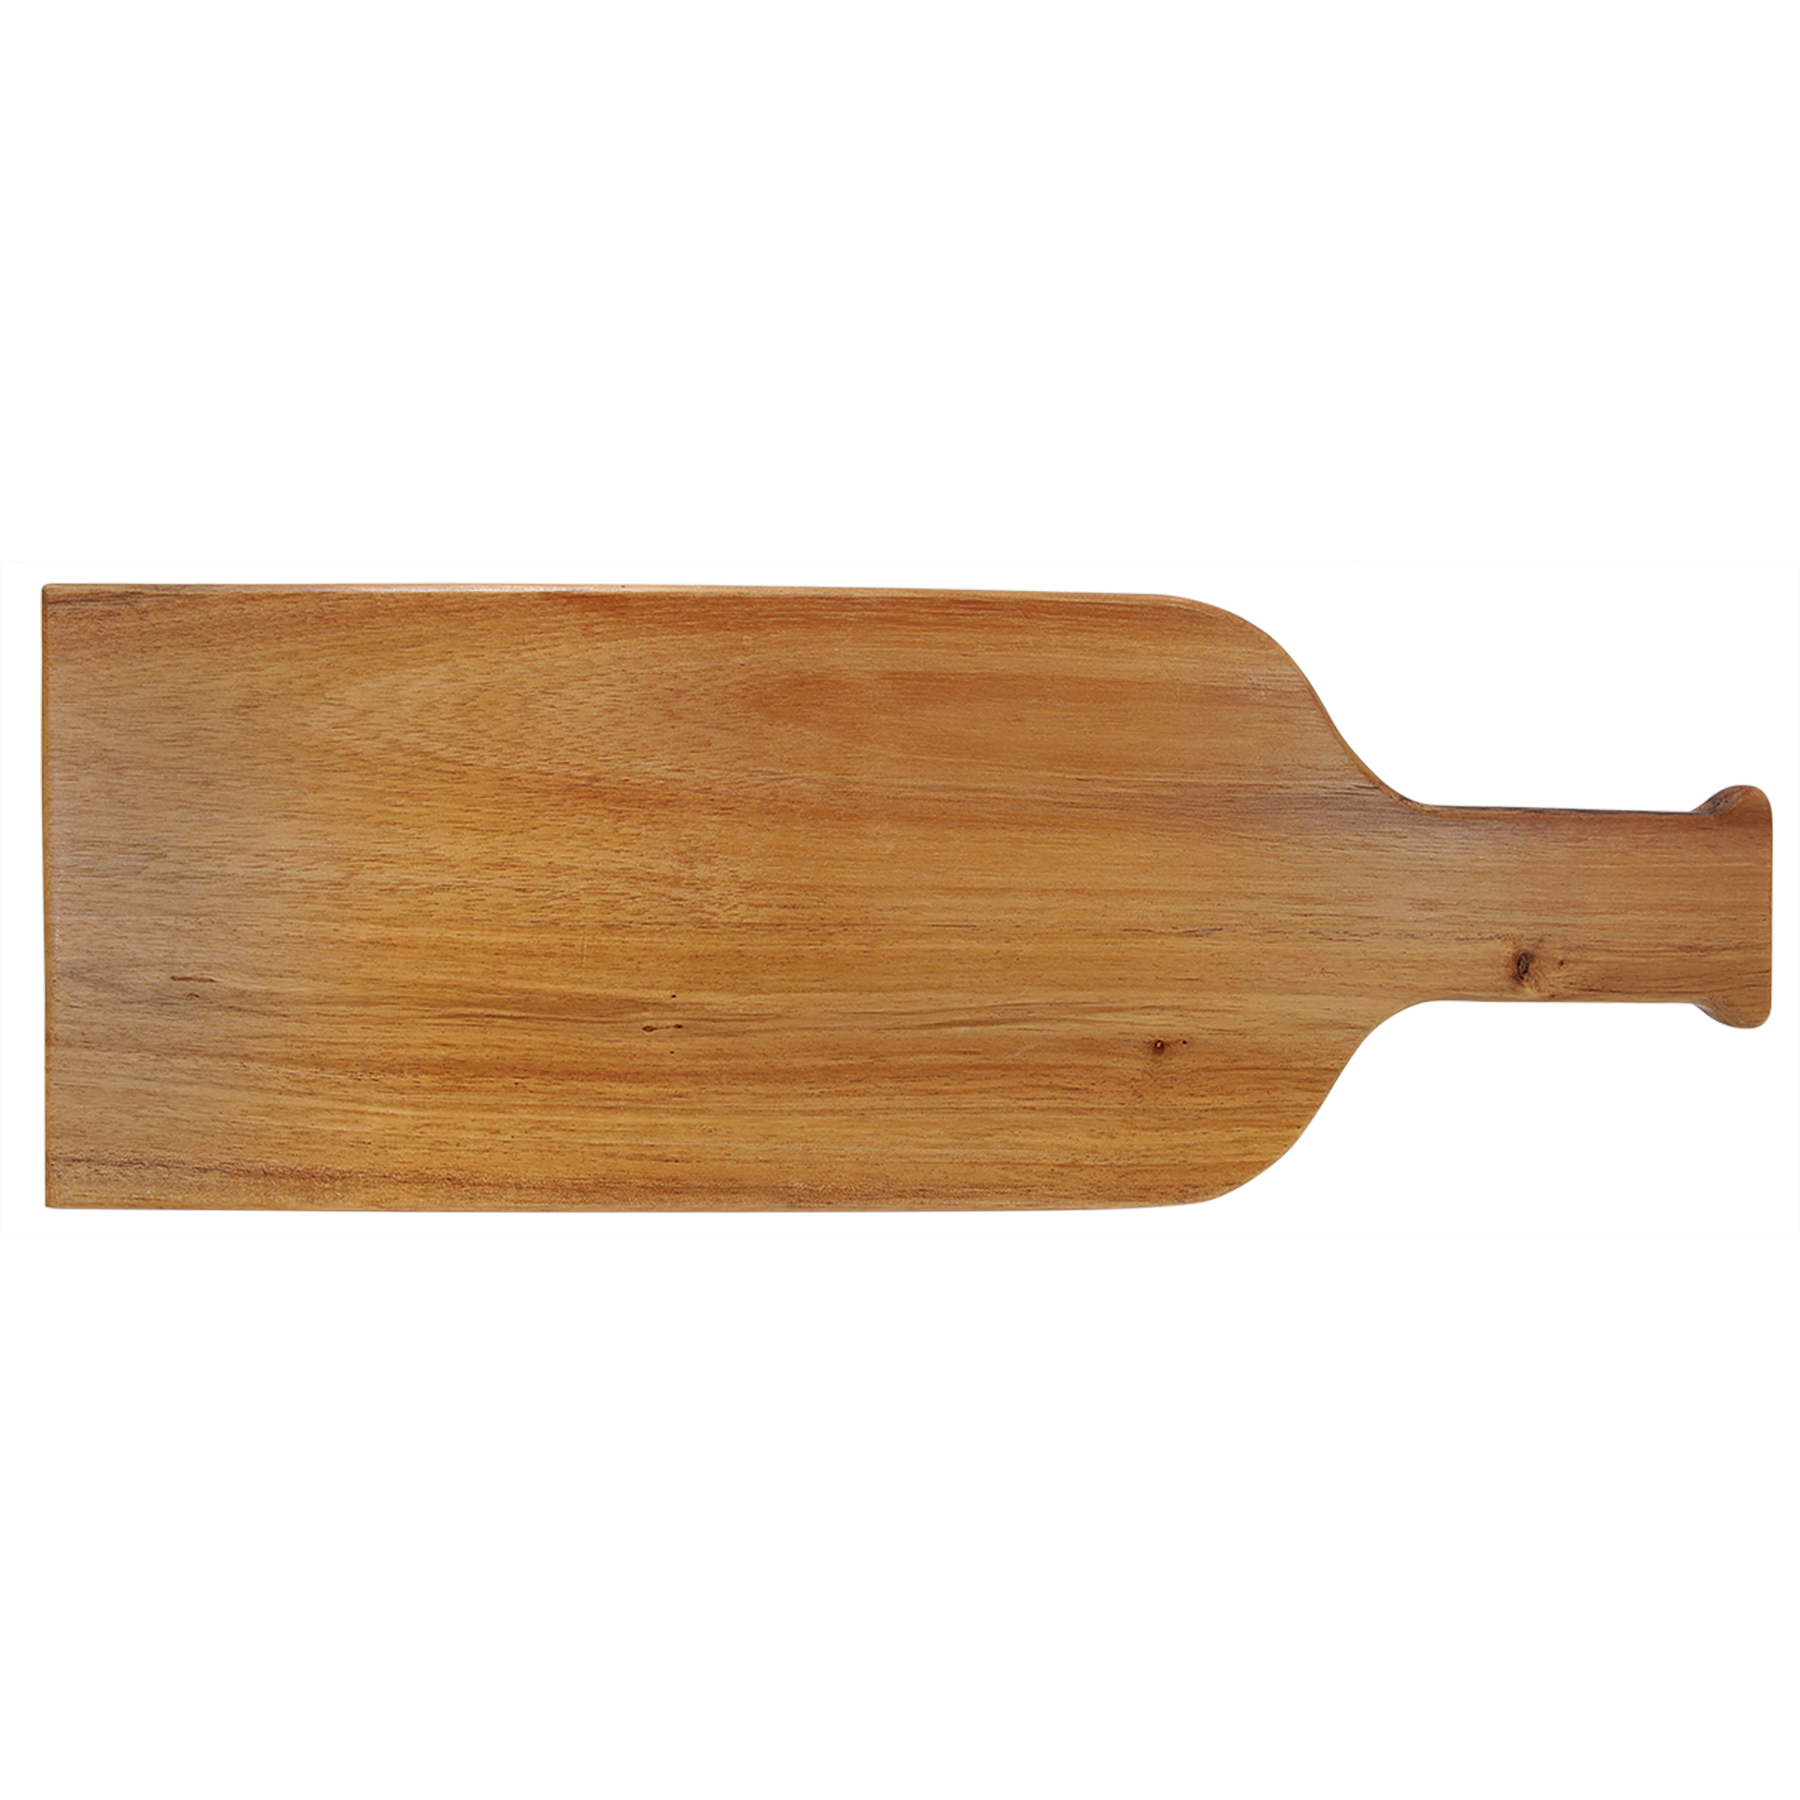 17 1/2" x 6" Acacia Wood/Slate Serving Board with Two Tools